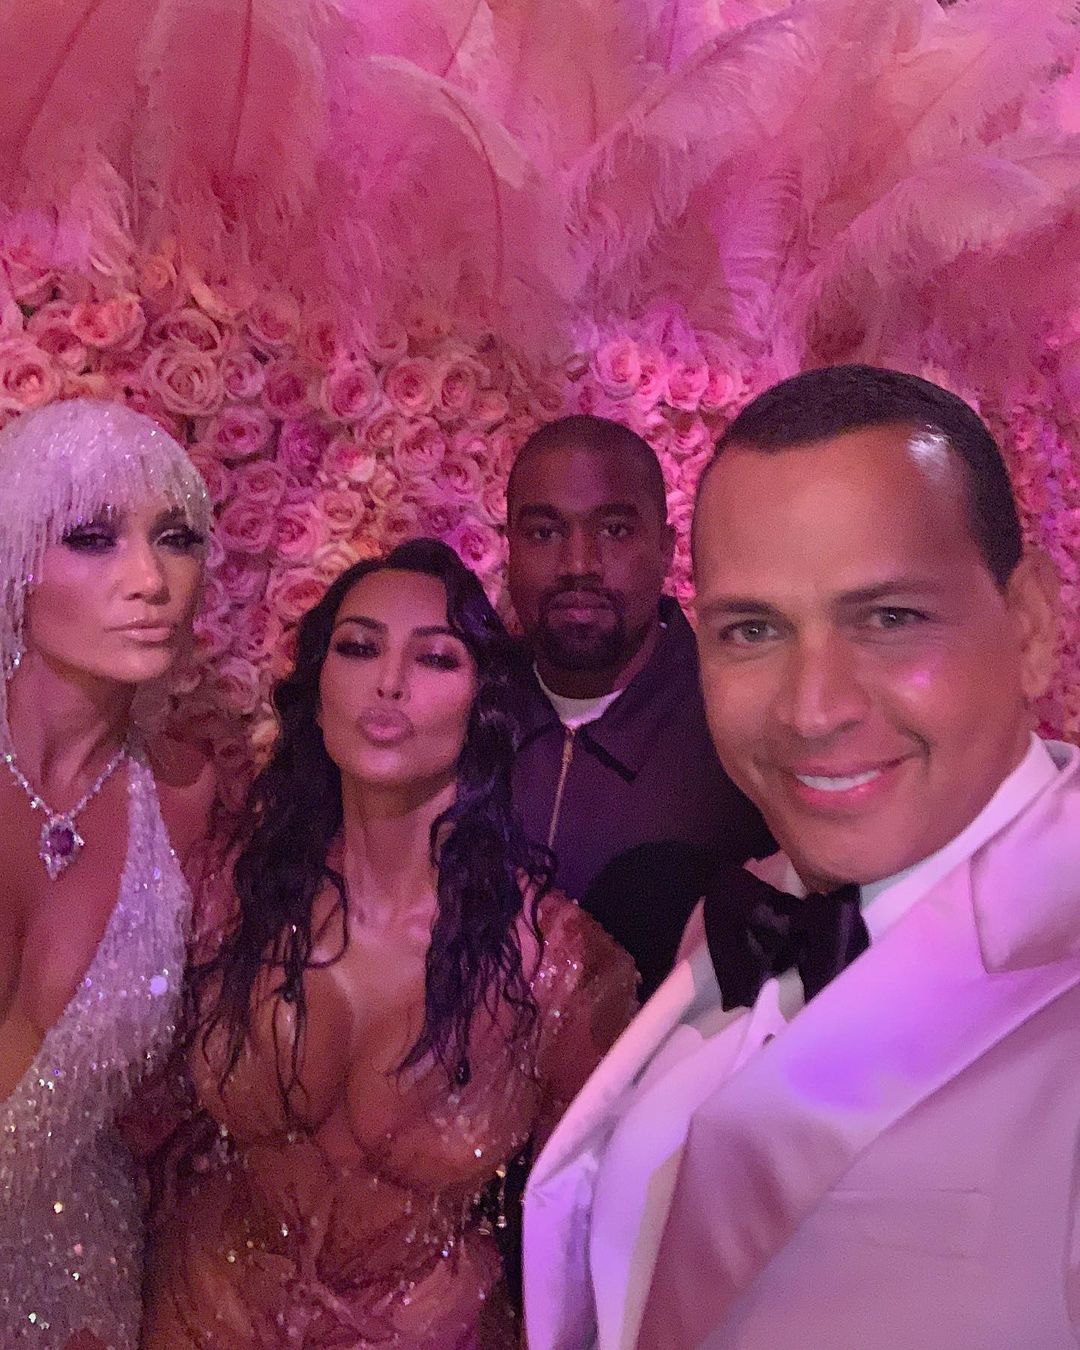 Alex Rodriguez took this picture of himself, Jennifer Lopez, Kim Kardashian, and Kanye West in the met gala